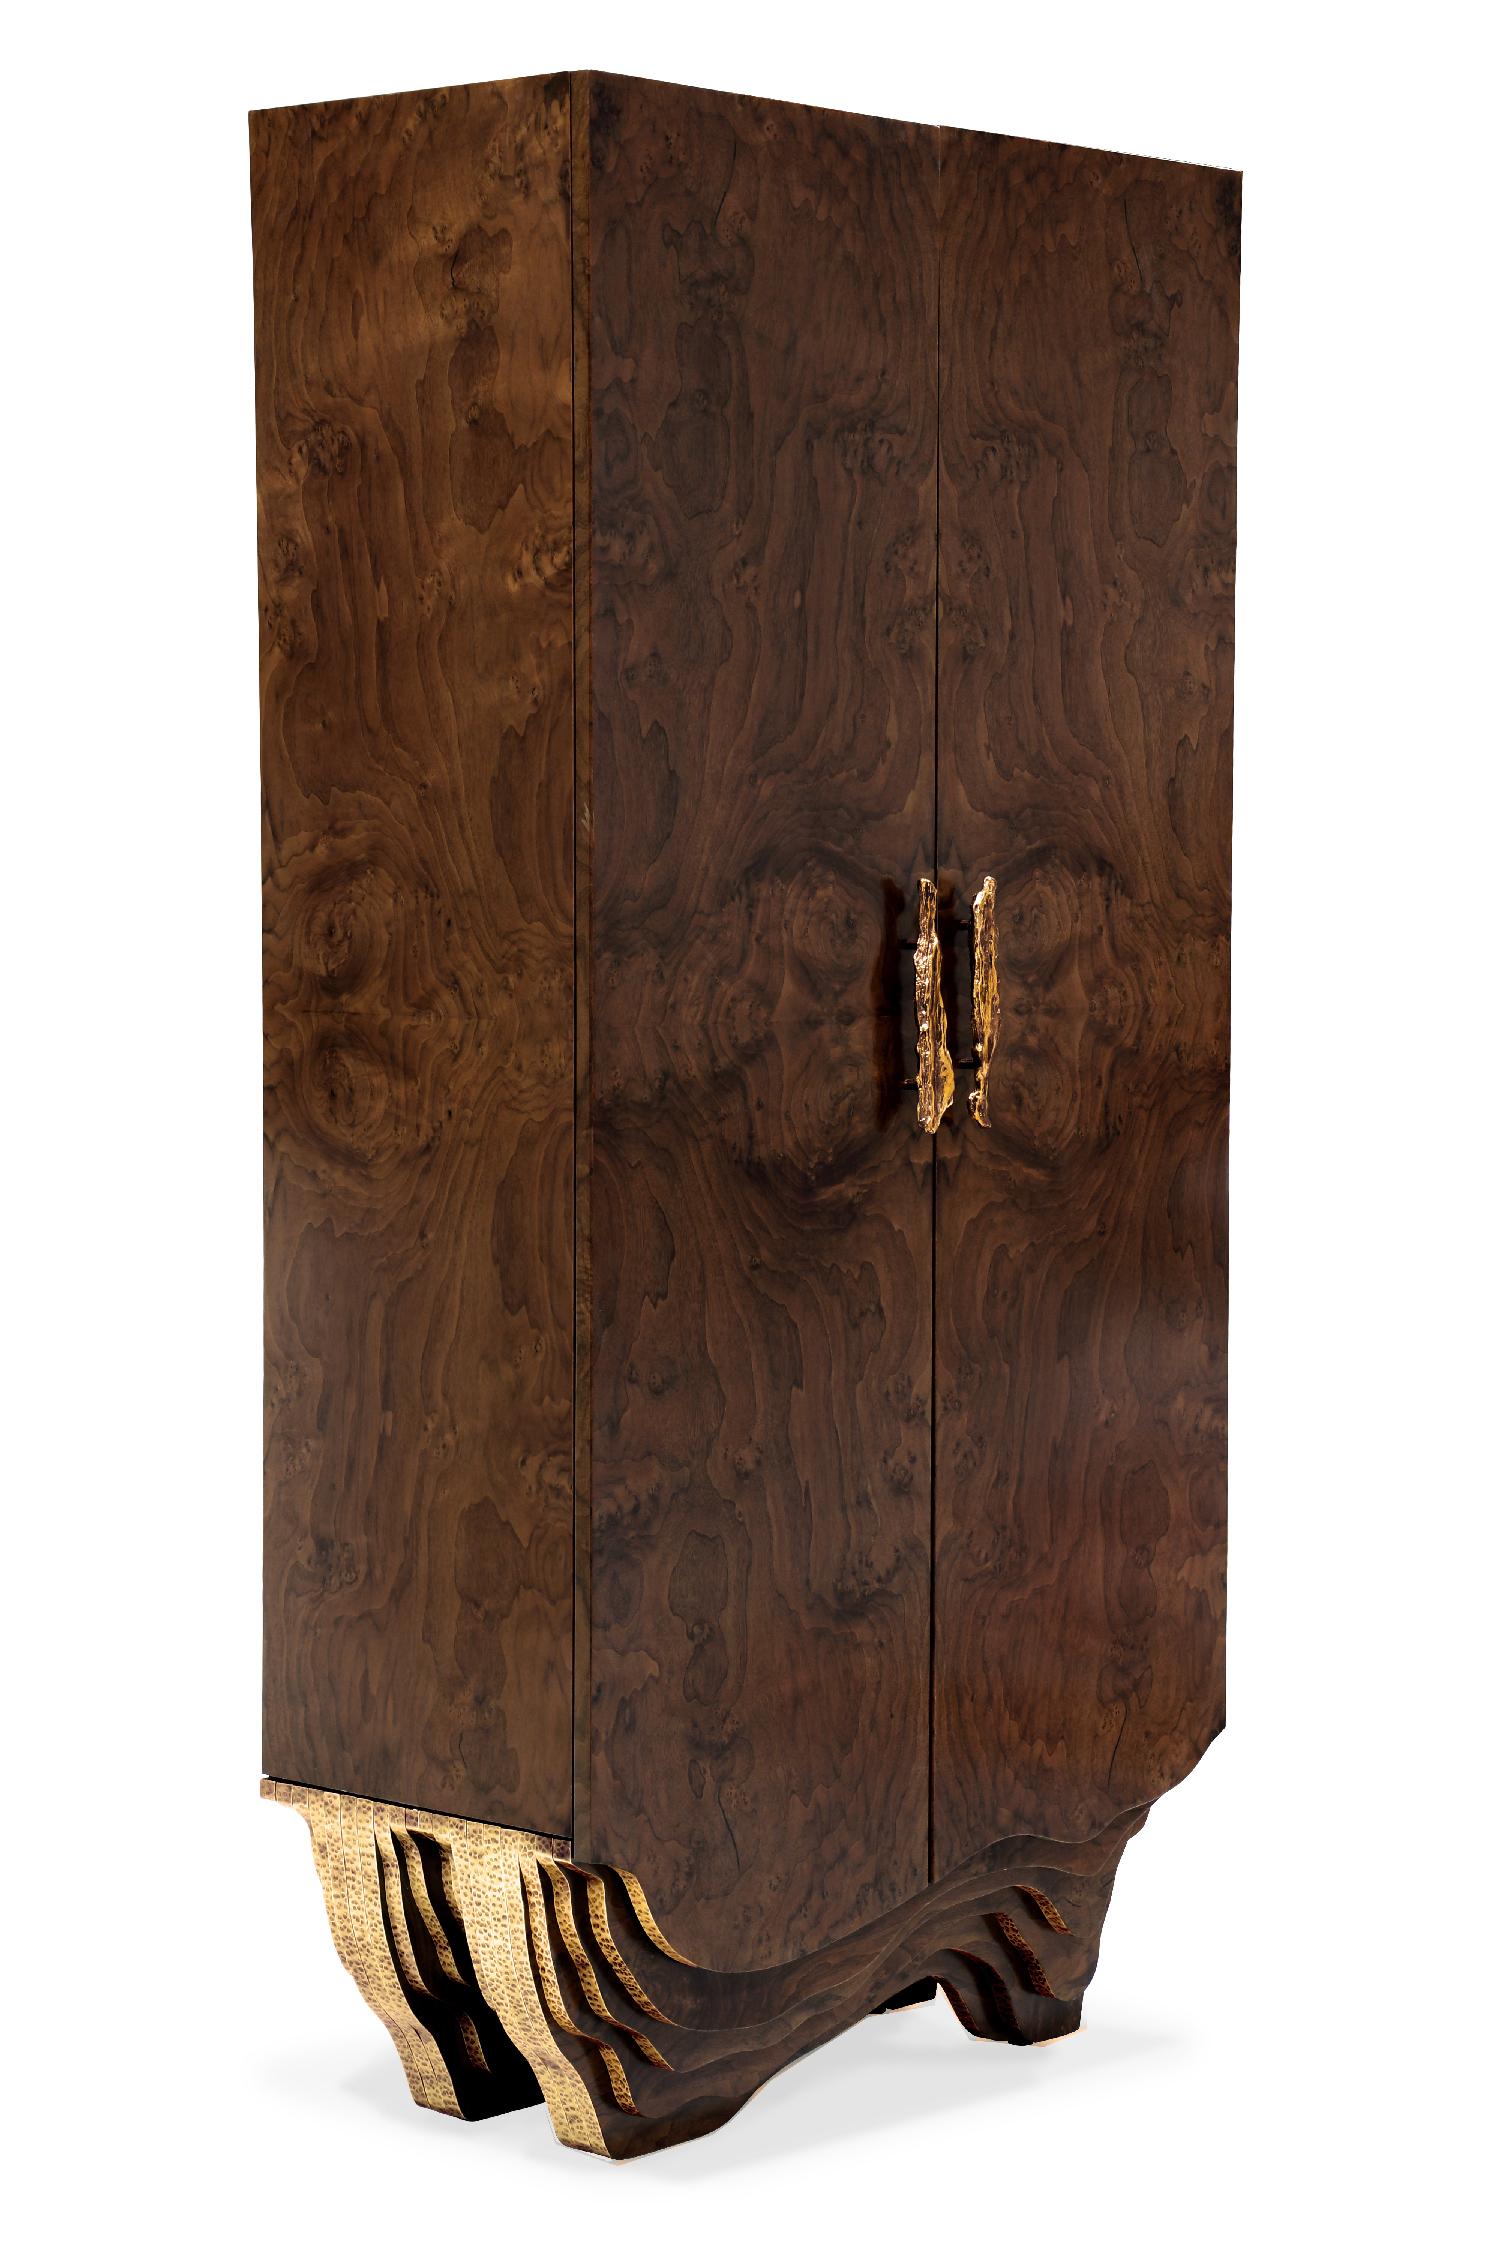 Huang is a mountain range in eastern China known for its spectacular scenery. Inspired by this magnificence, our designers created Huang cabinet. It features an outside in walnut root veneer, an inside in rosewood veneer & details in matte hammered